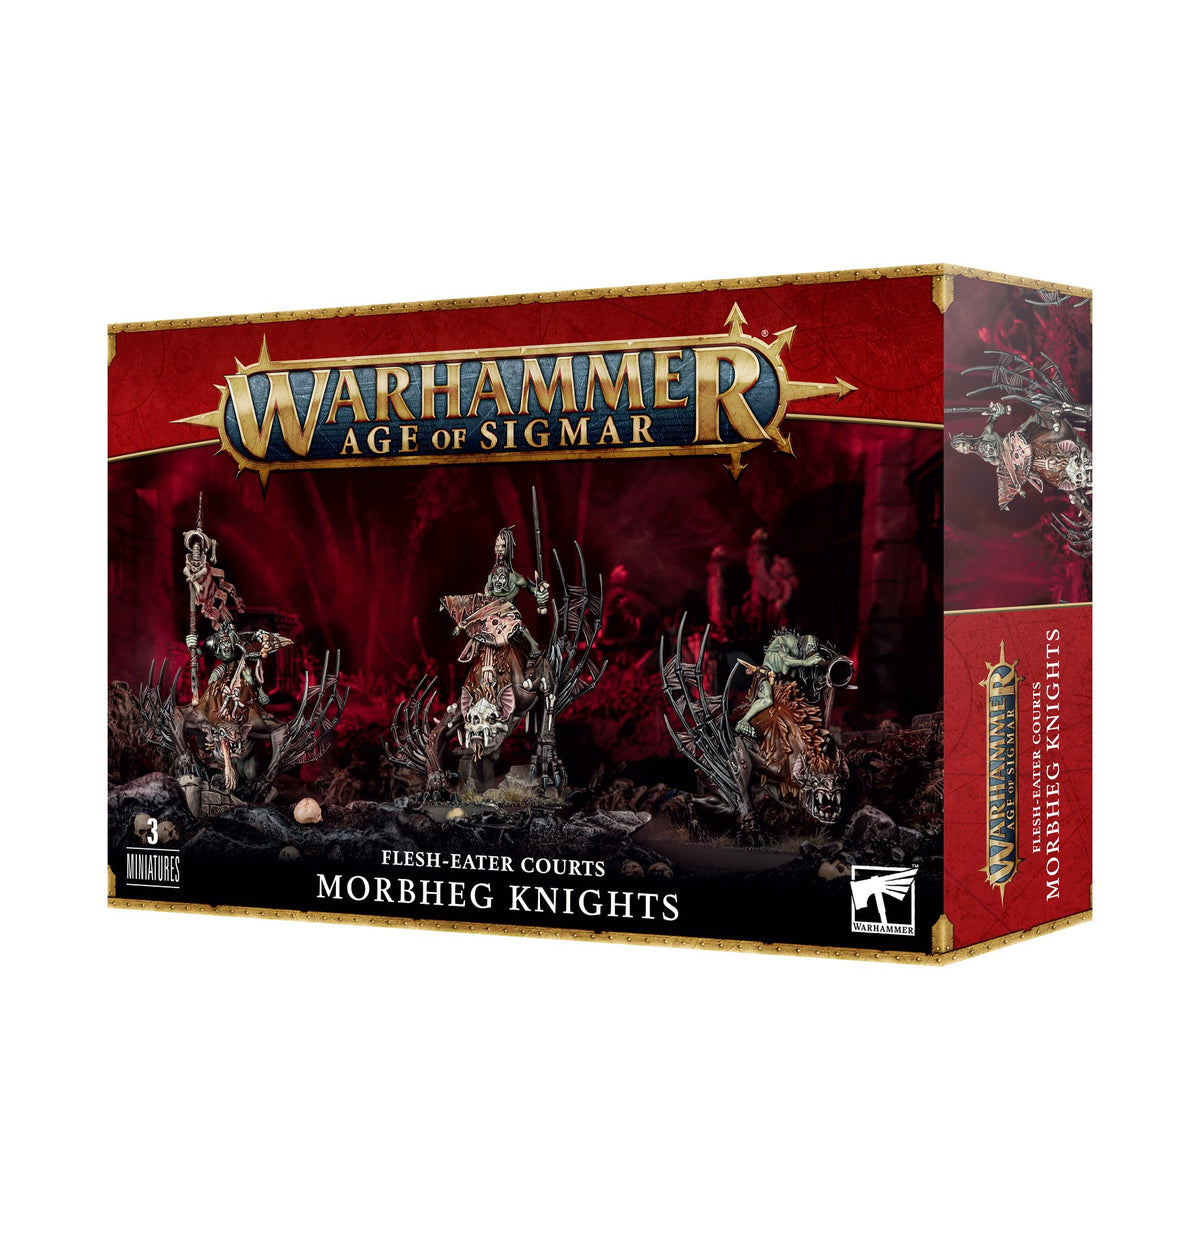 Warhammer Age Of Sigmar: FLESH-EATER COURTS: MORBHEG KNIGHTS